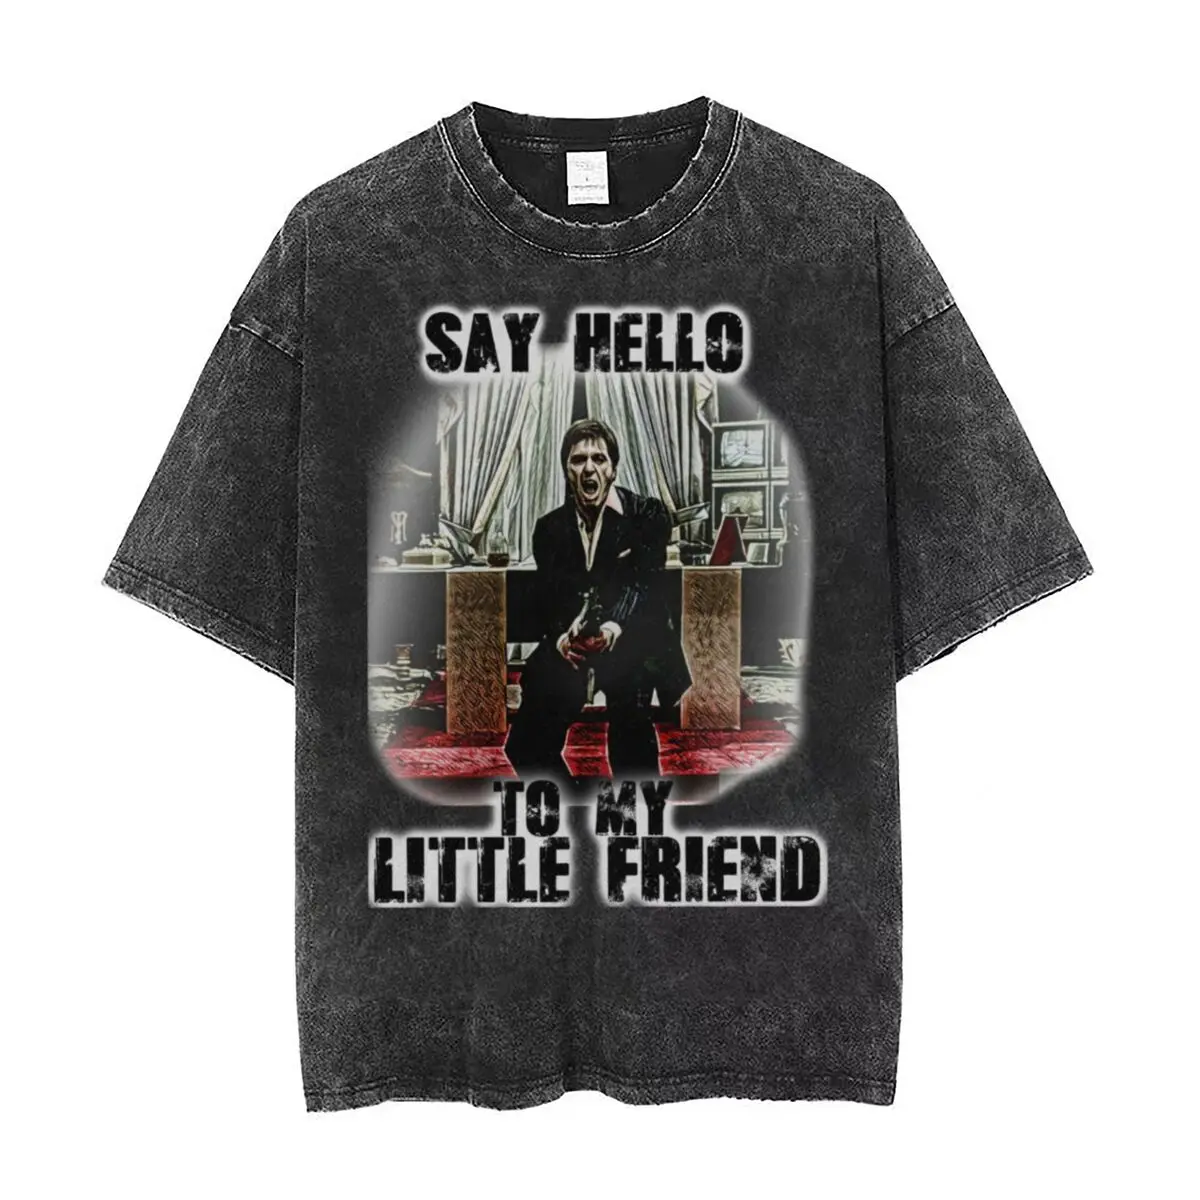 

Say Hello To My Little Friend Scarface Washed T Shirts Streetwear Hip Hop T-Shirt Tees Tops Men Women Cotton Harajuku Summer